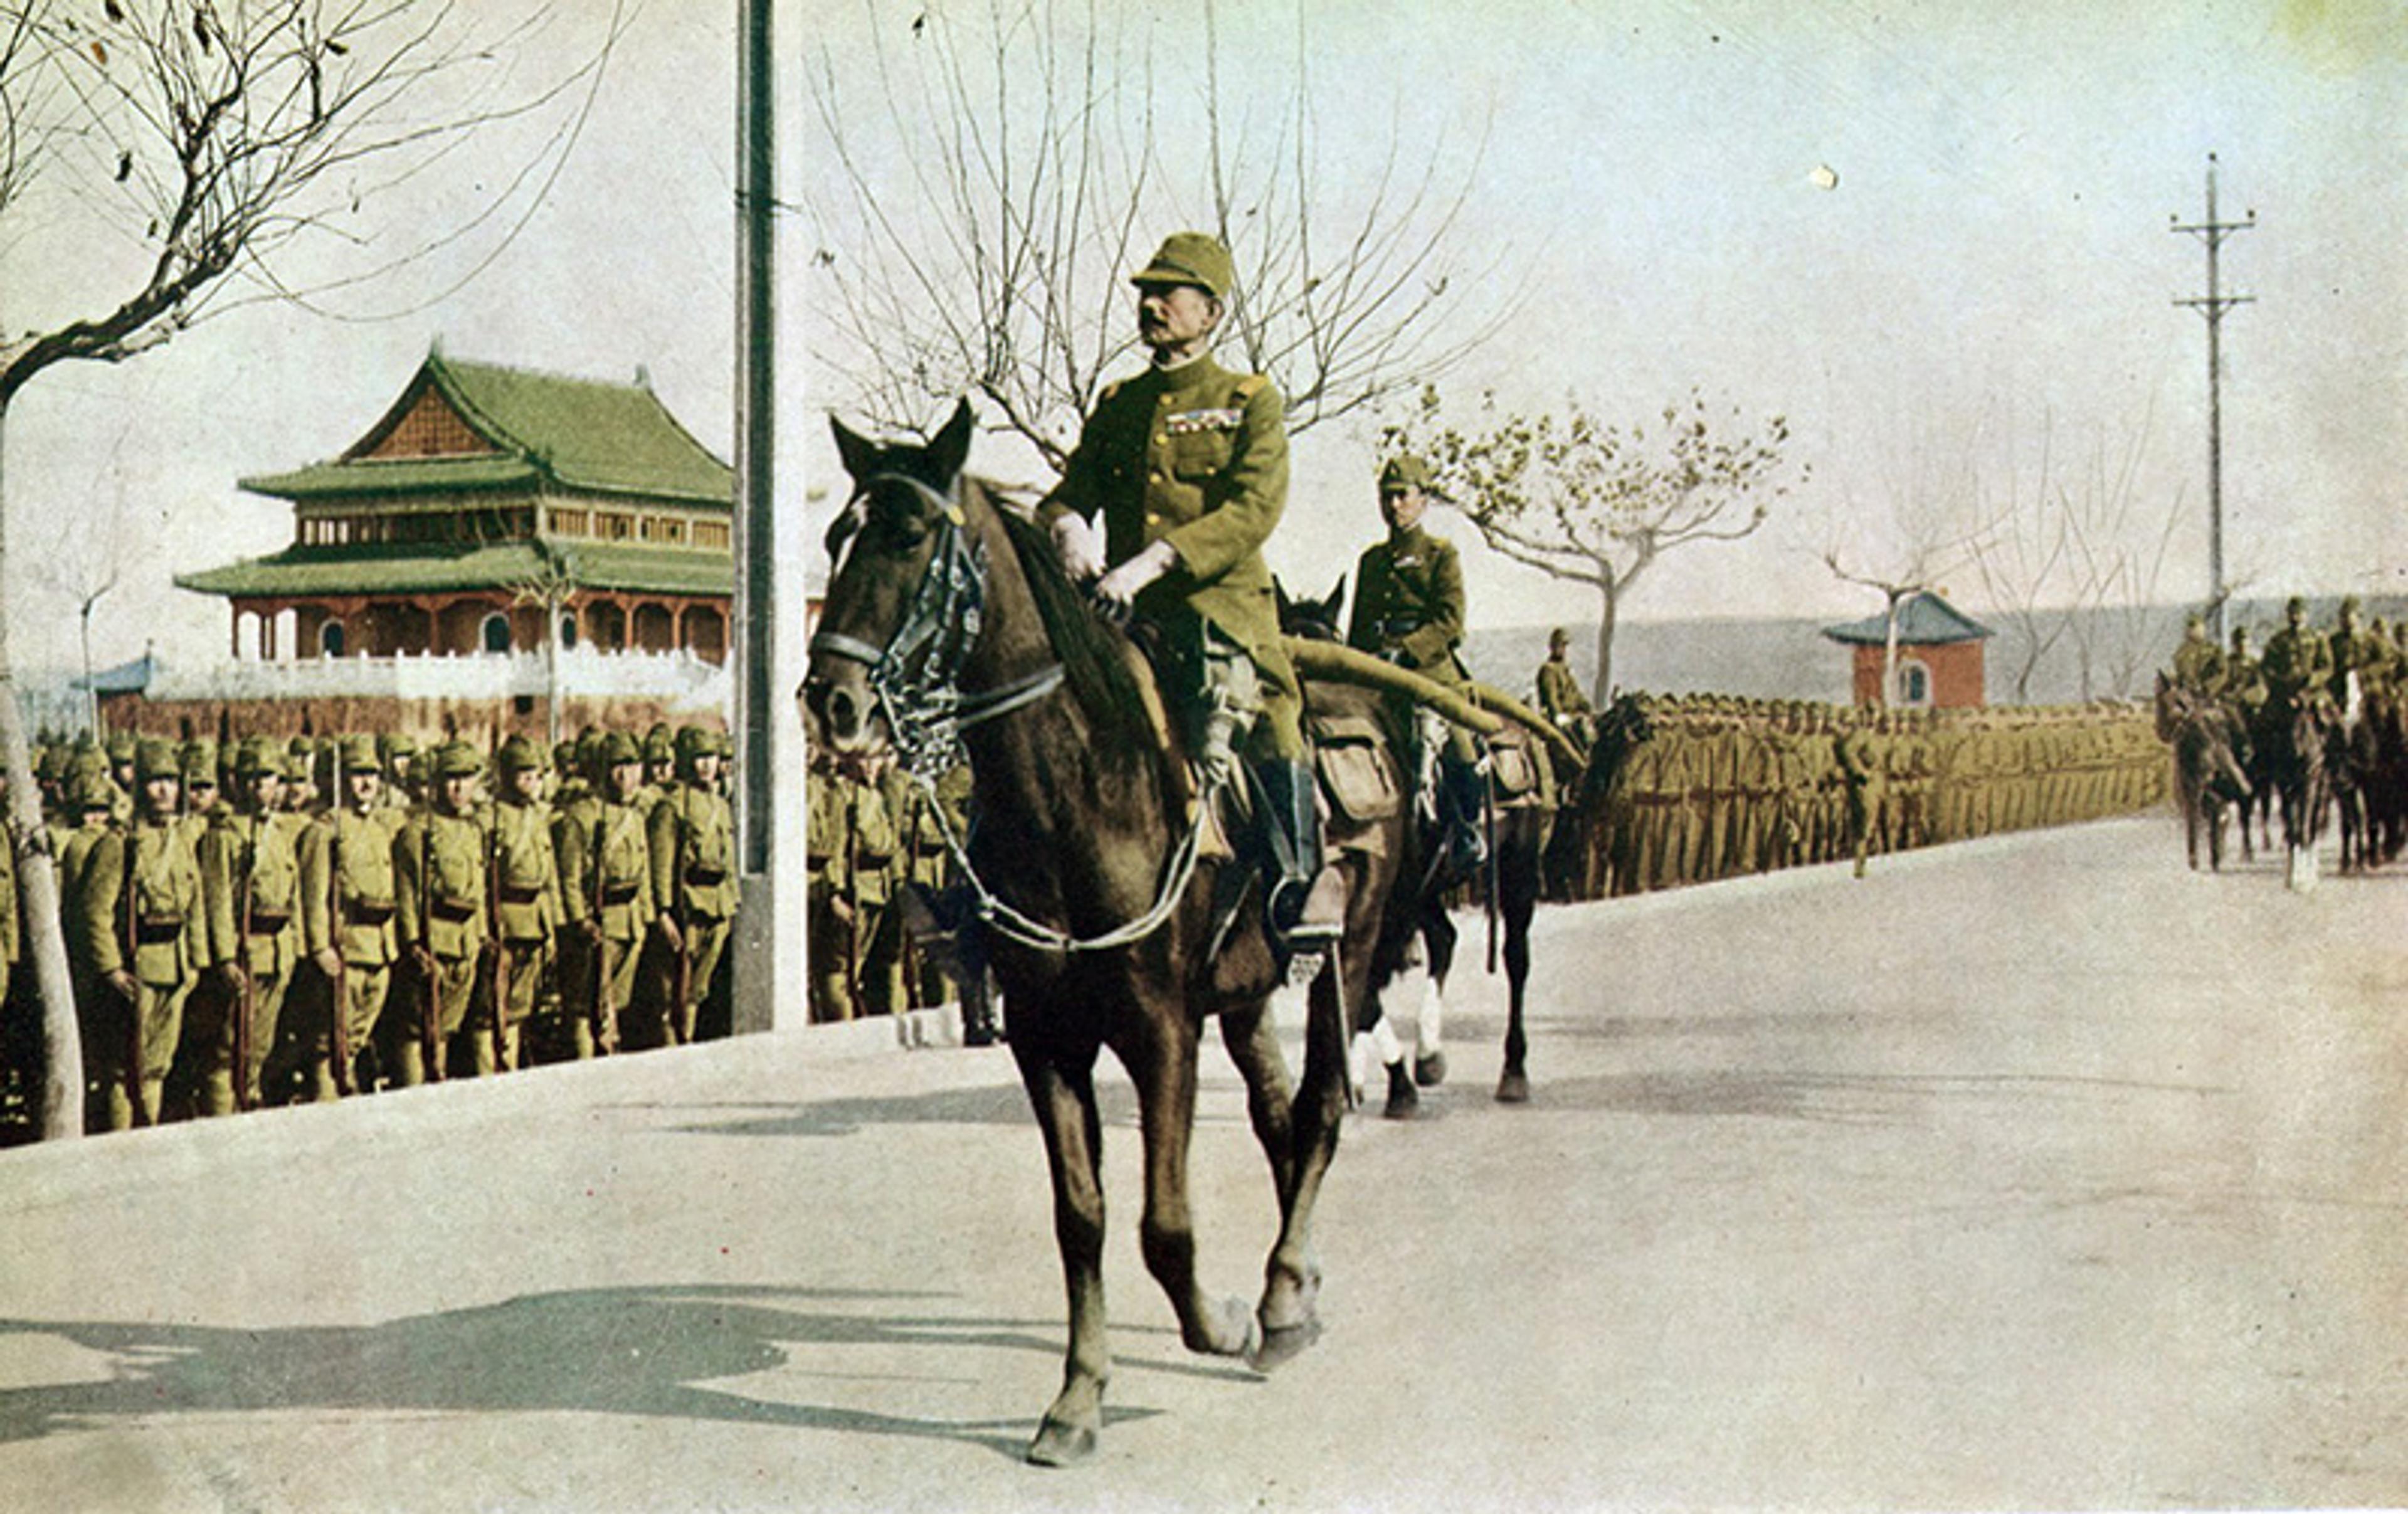 Soldiers in uniform march in formation with trees and telephone poles visible. In the foreground, a soldier on horseback leads the procession. A traditional building with a green, ornate roof is in the background, suggesting an Asian setting. The scene appears to be historical, possibly early 20th century.